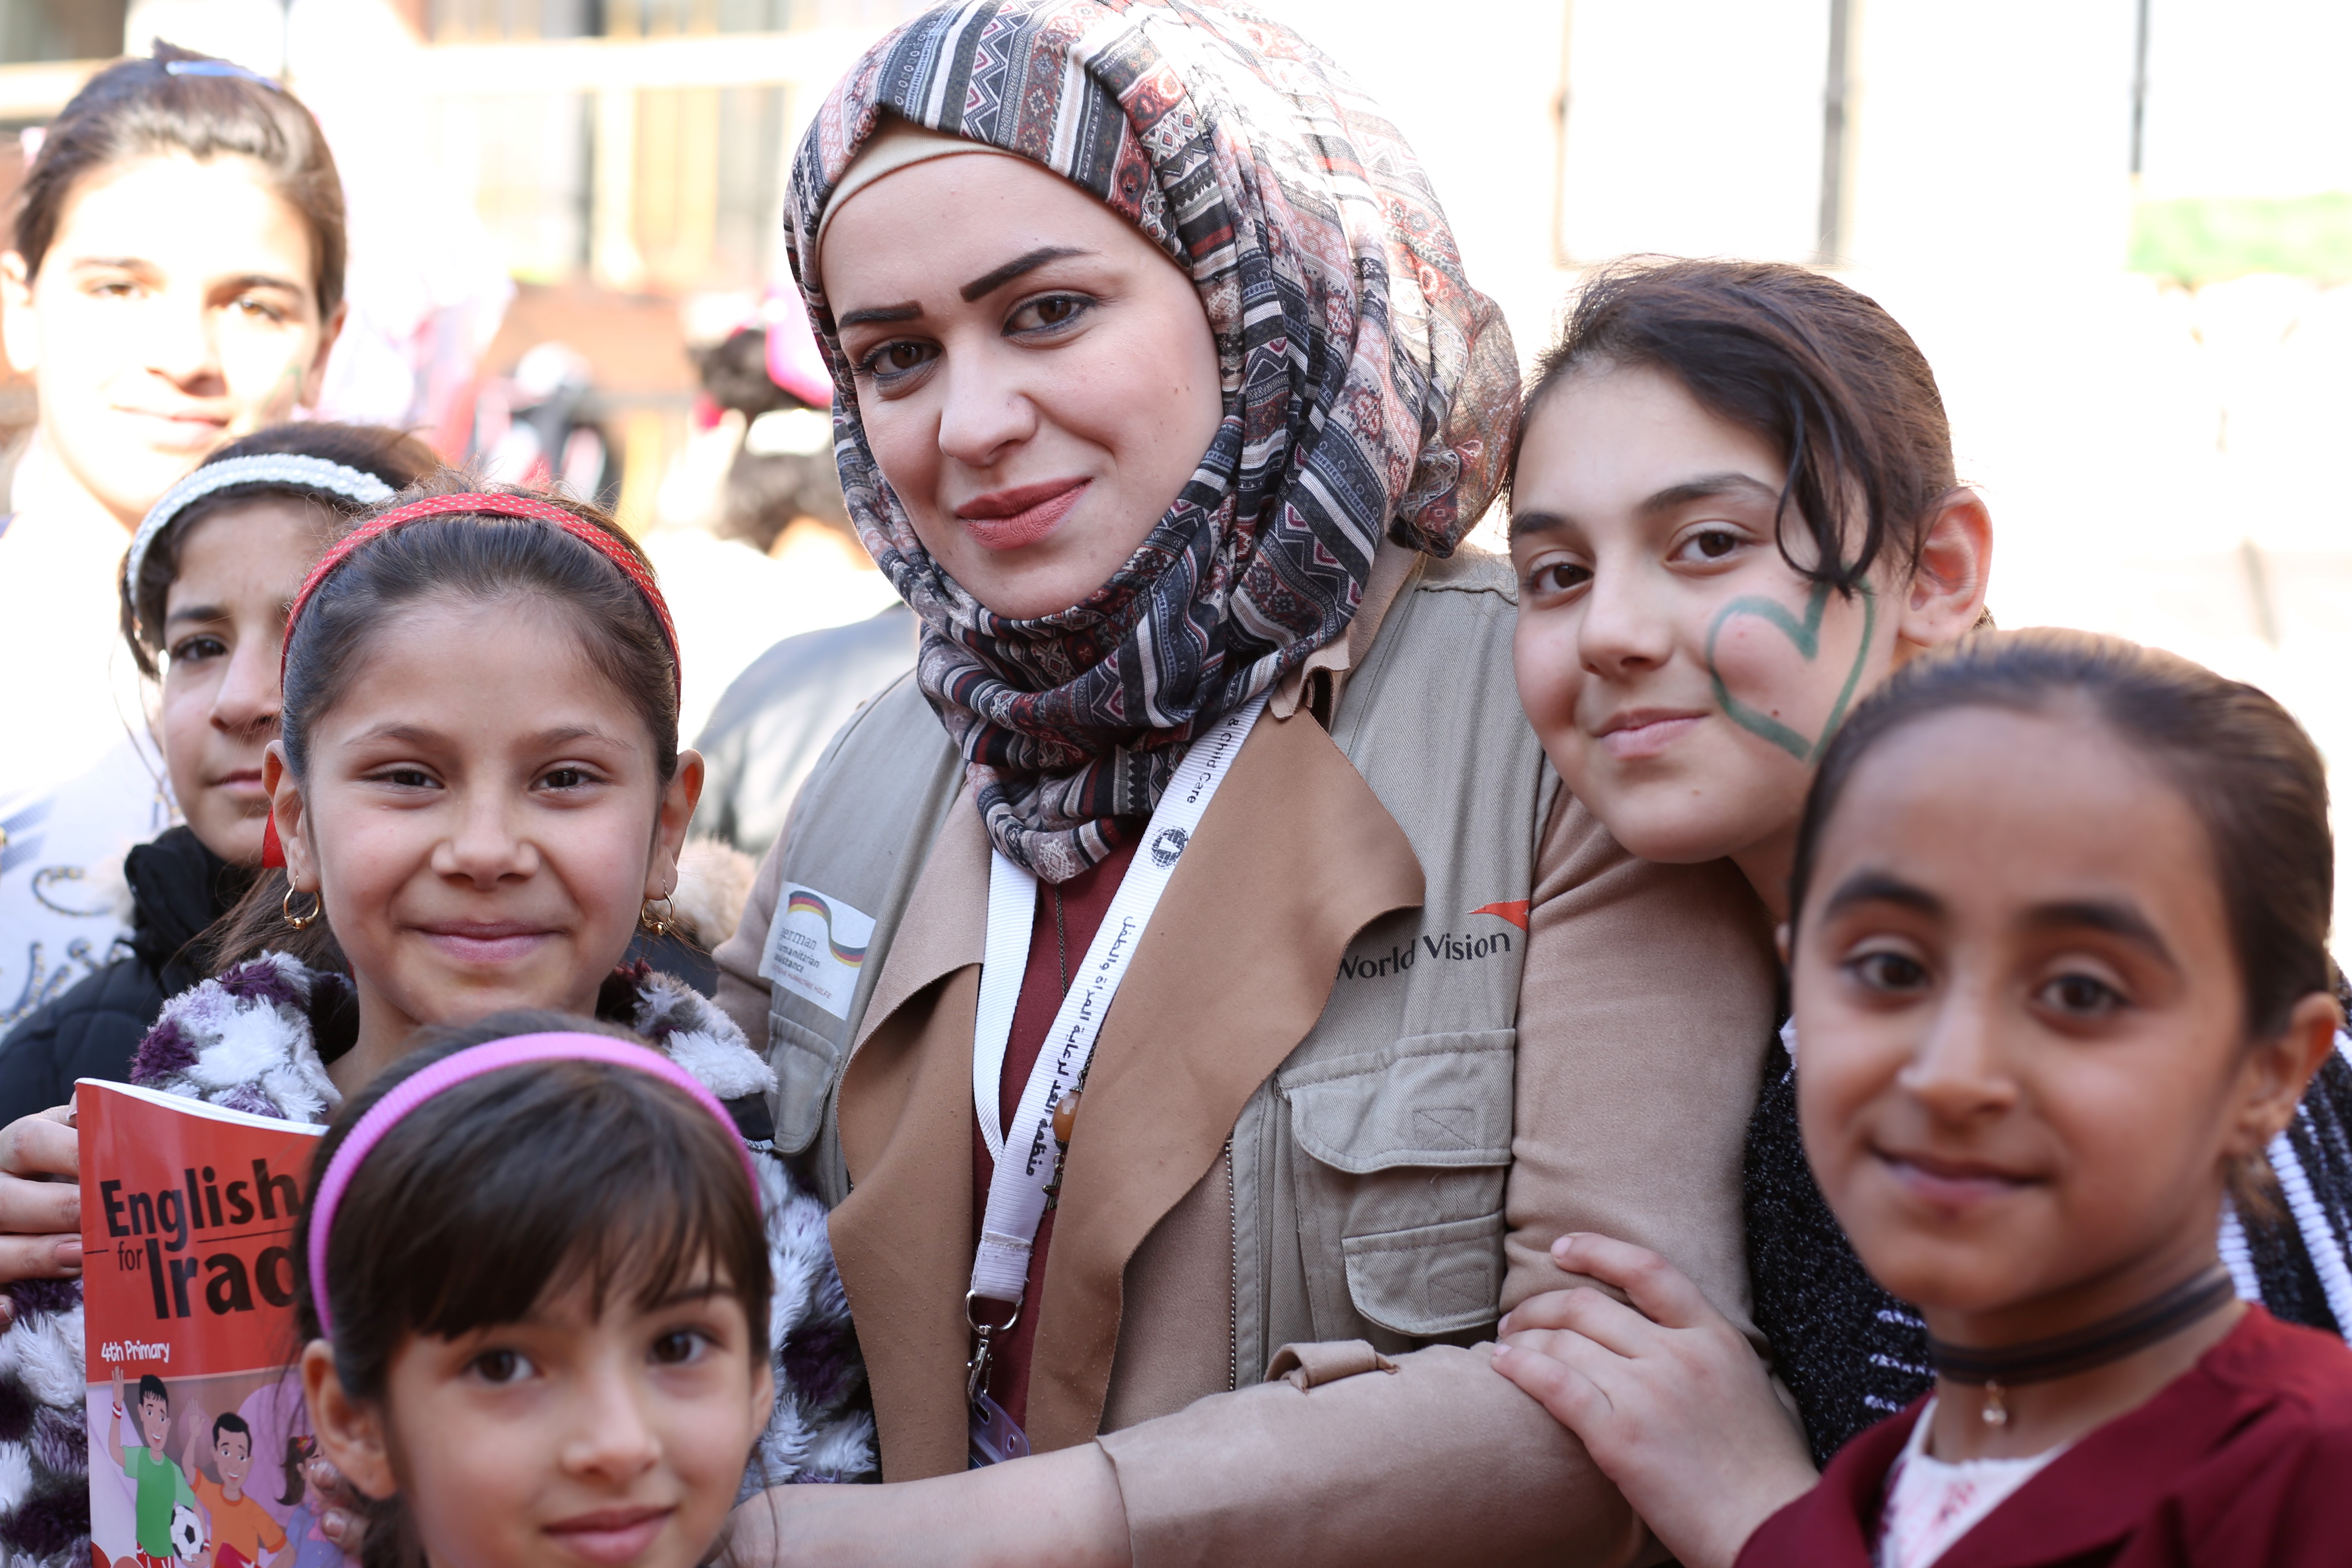 Fatima works with children in Mosul to help them recover a happy, healthy childhood